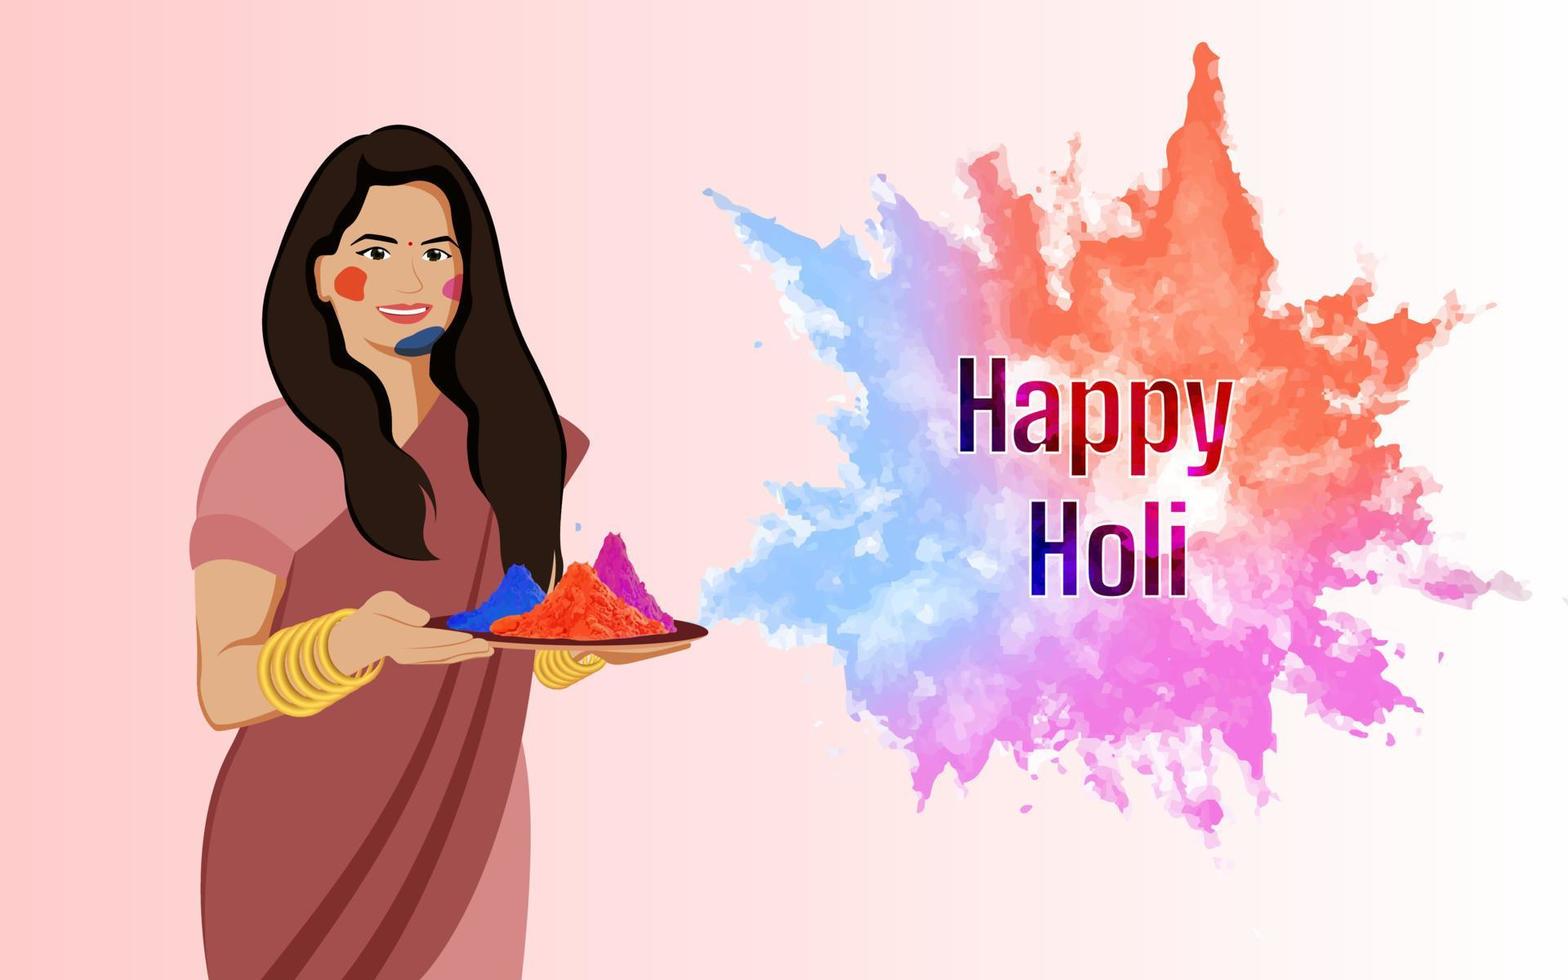 Women with powder color, Happy Holi character illustration on white background. vector